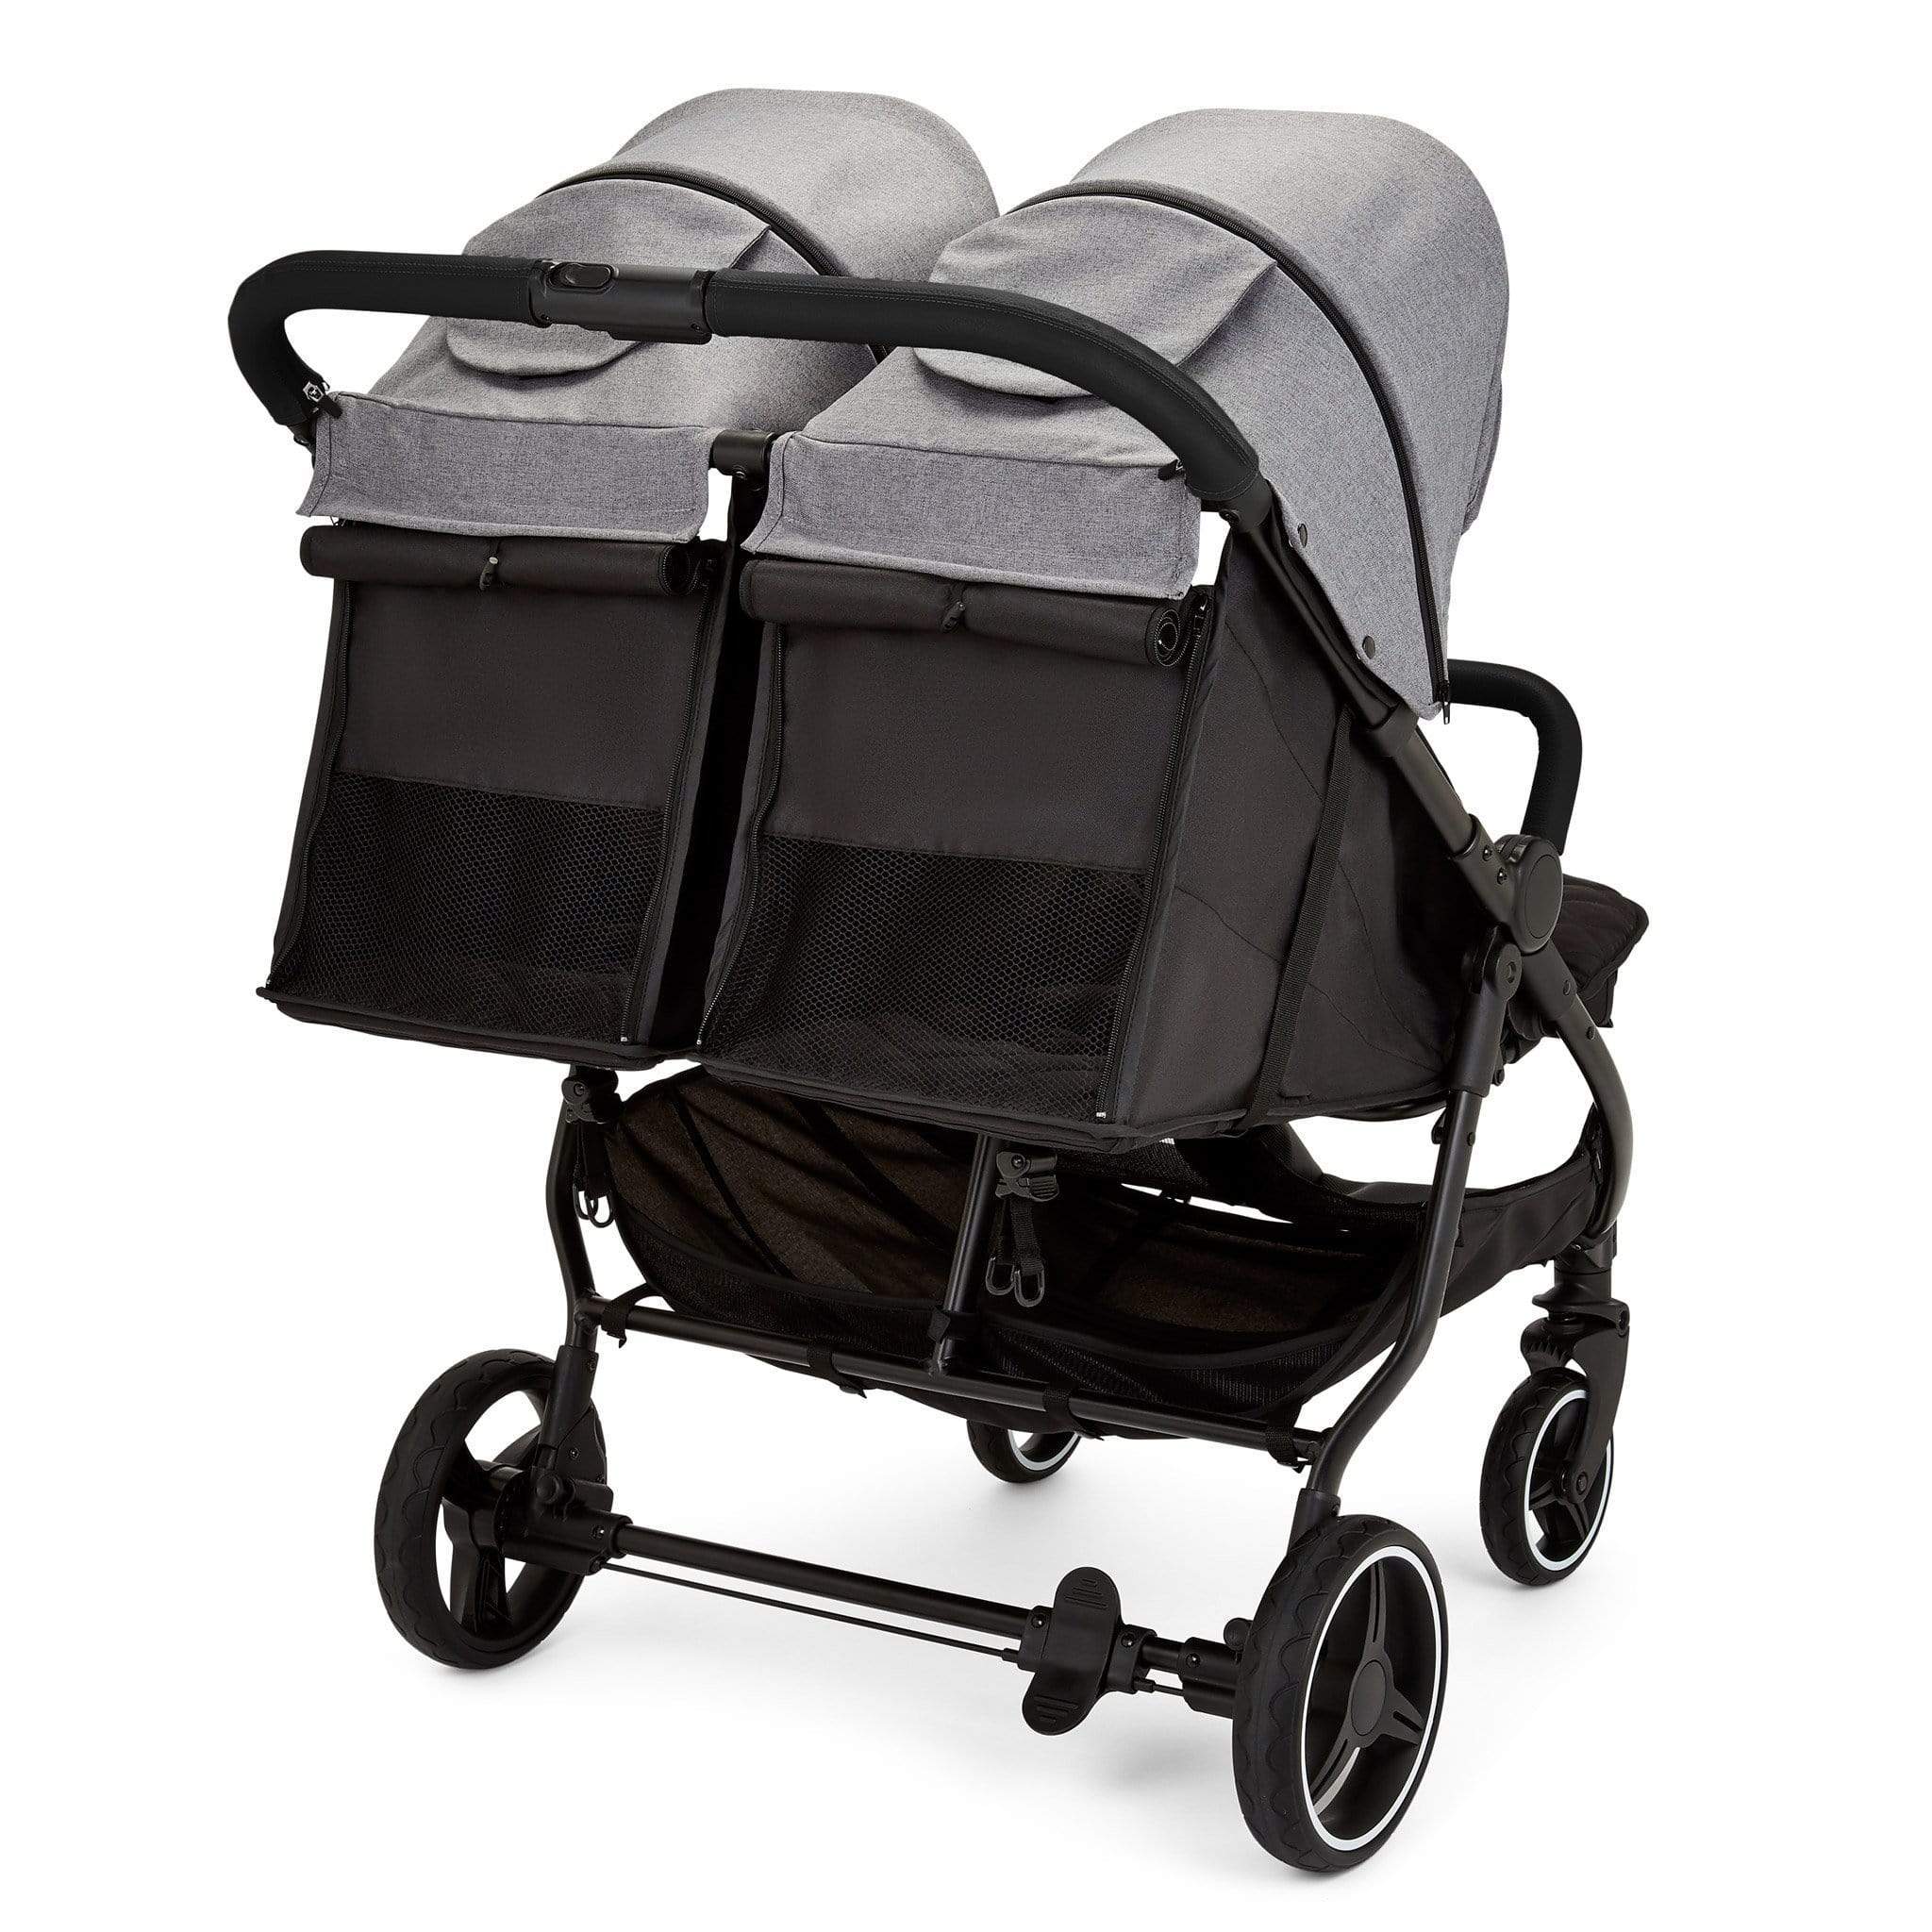 Ickle Bubba double buggies Ickle Bubba Venus Max Double Stroller Black/Space Grey/Black 16-004-200-014